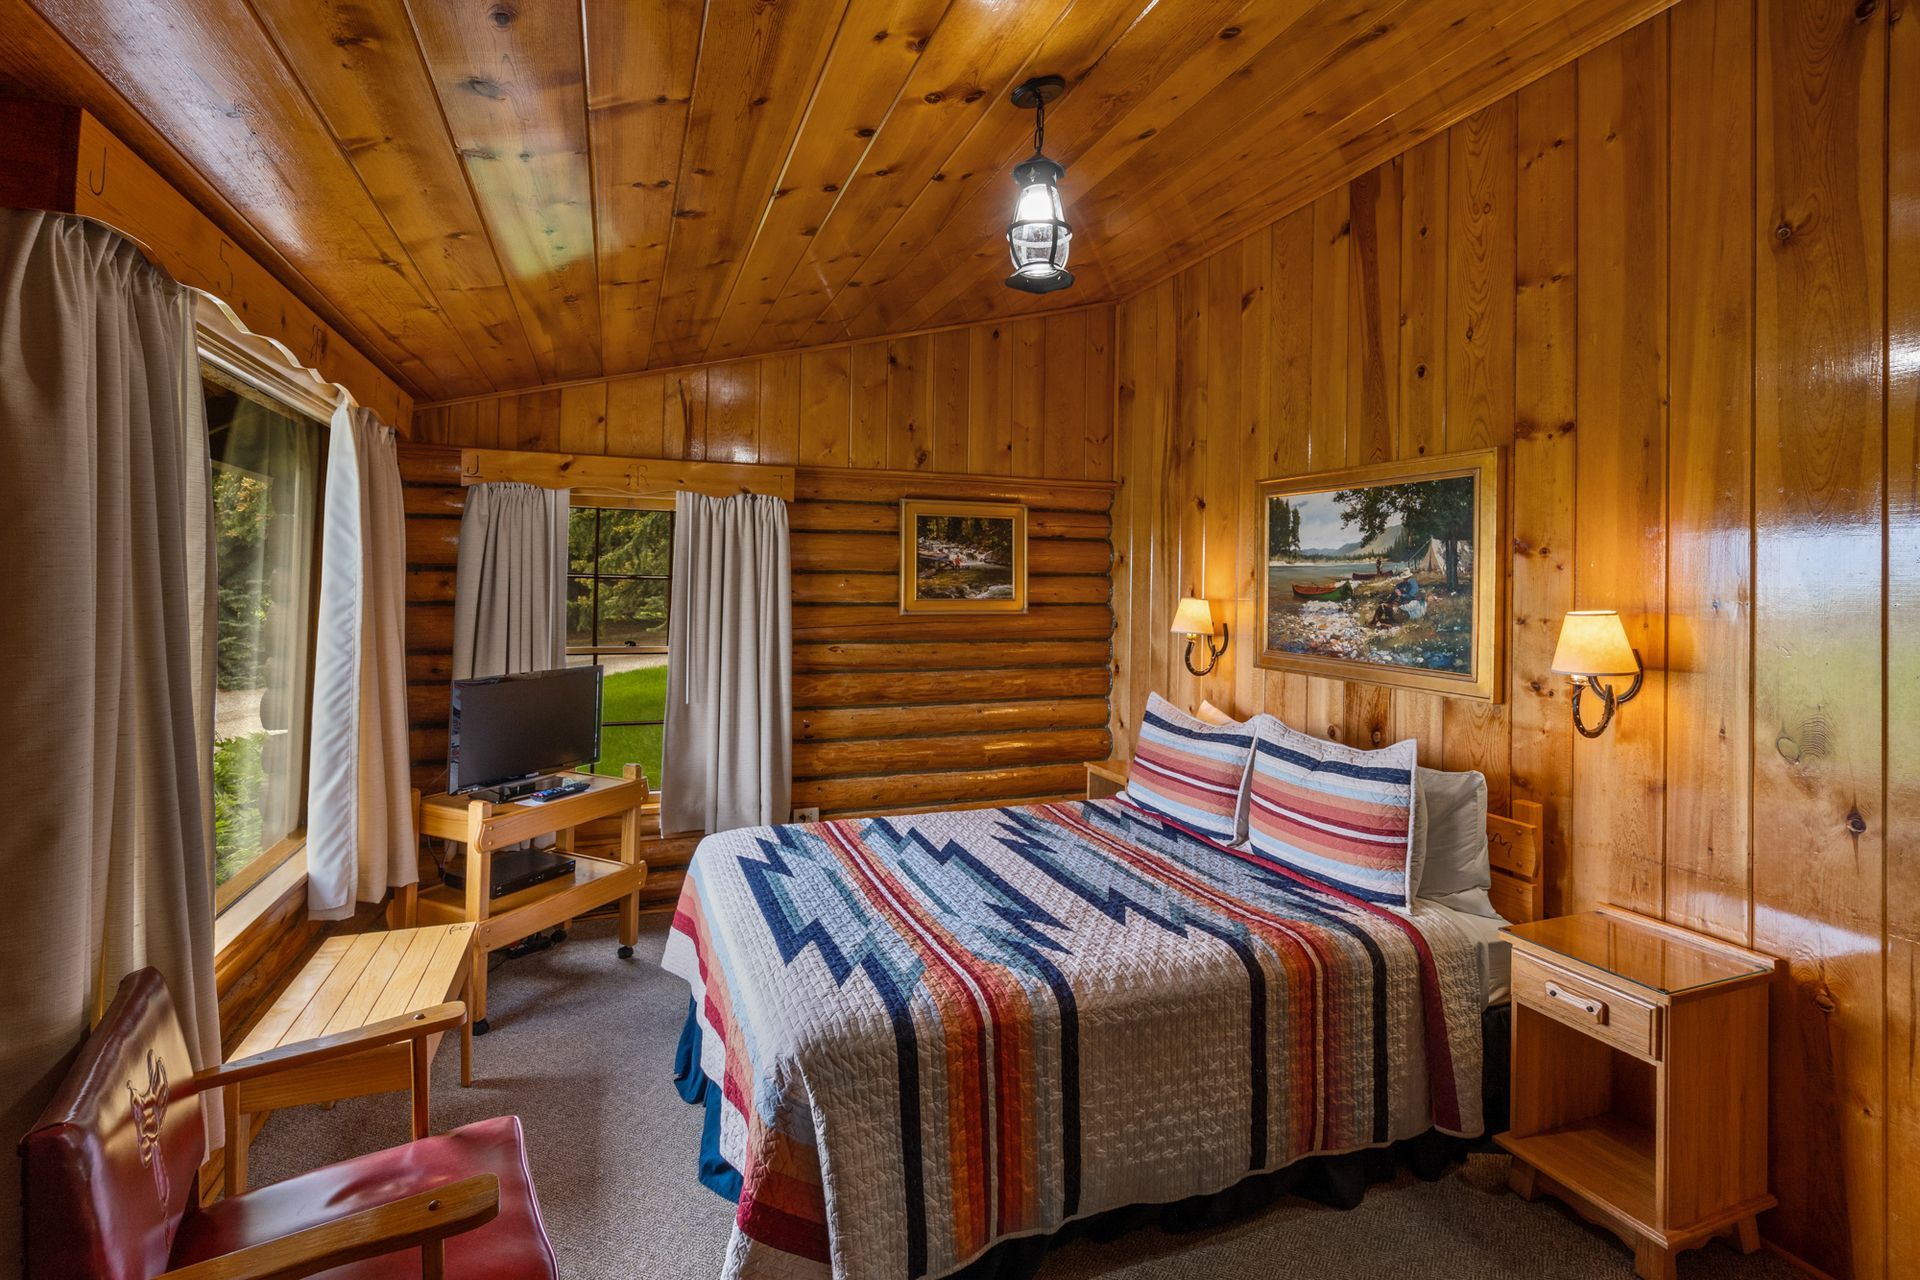 A bedroom in a log cabin with a bed , chair , nightstand and television.